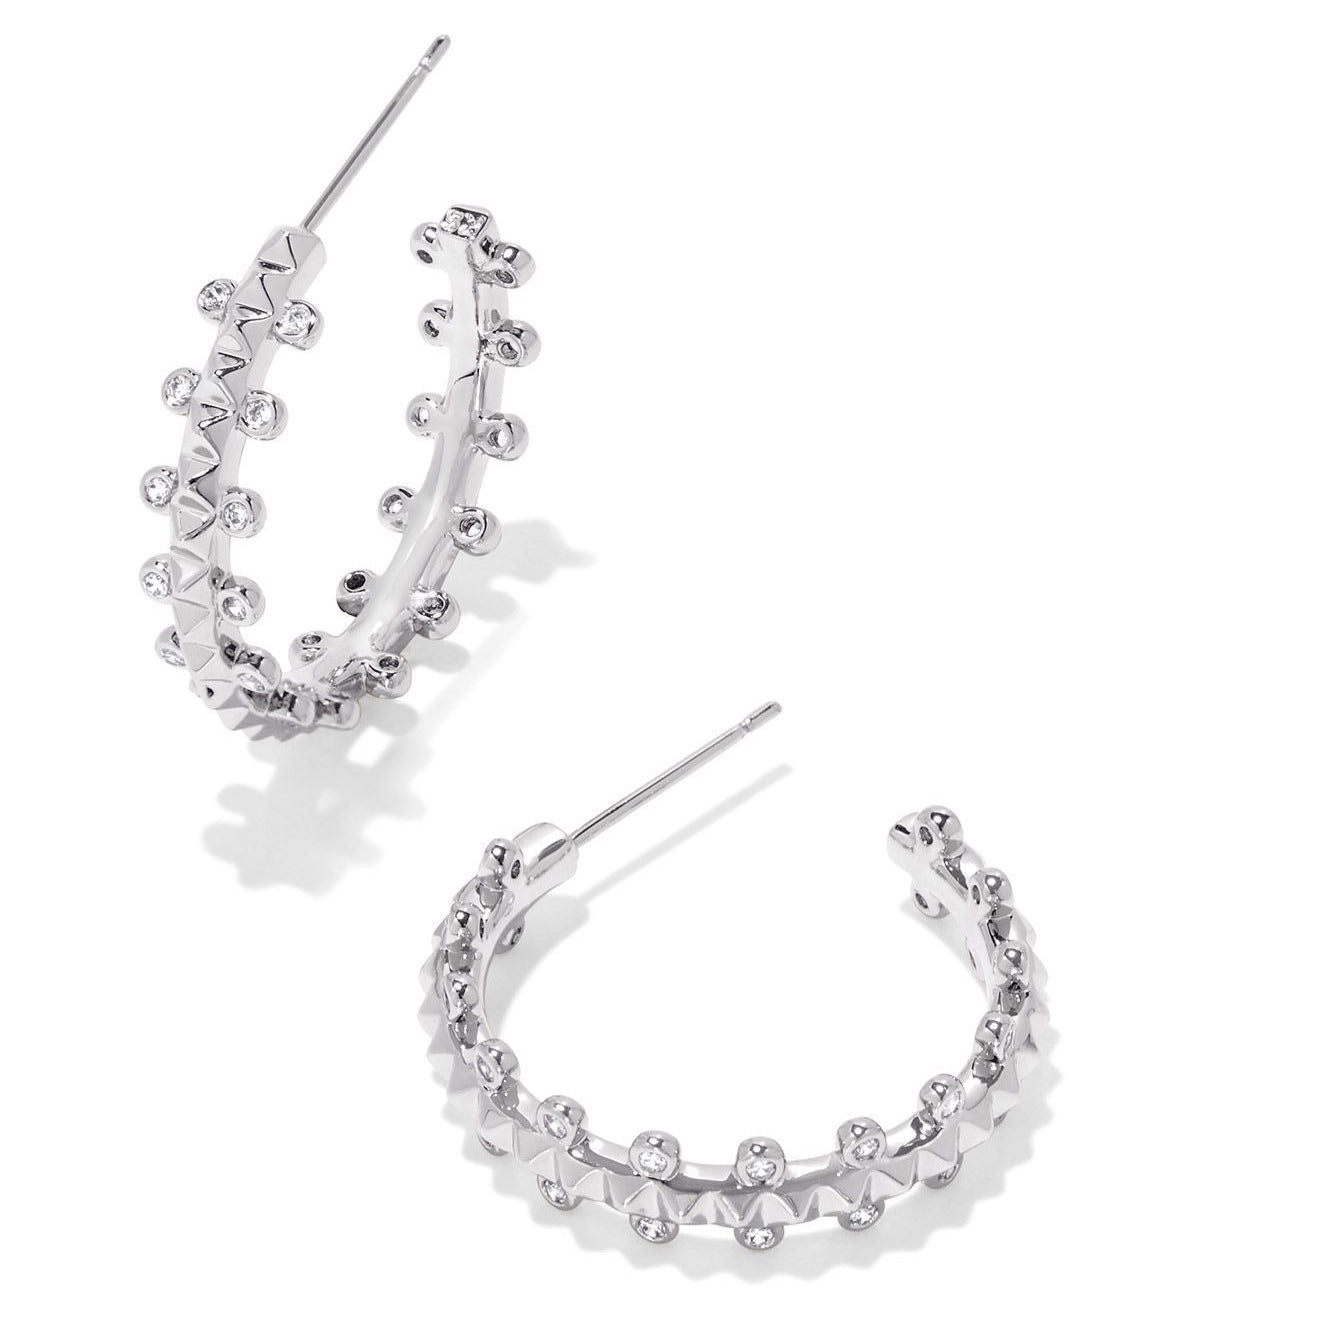 Kendra Scott | Jada Silver Small Hoop Earrings in White Crystal - Giddy Up Glamour Boutique